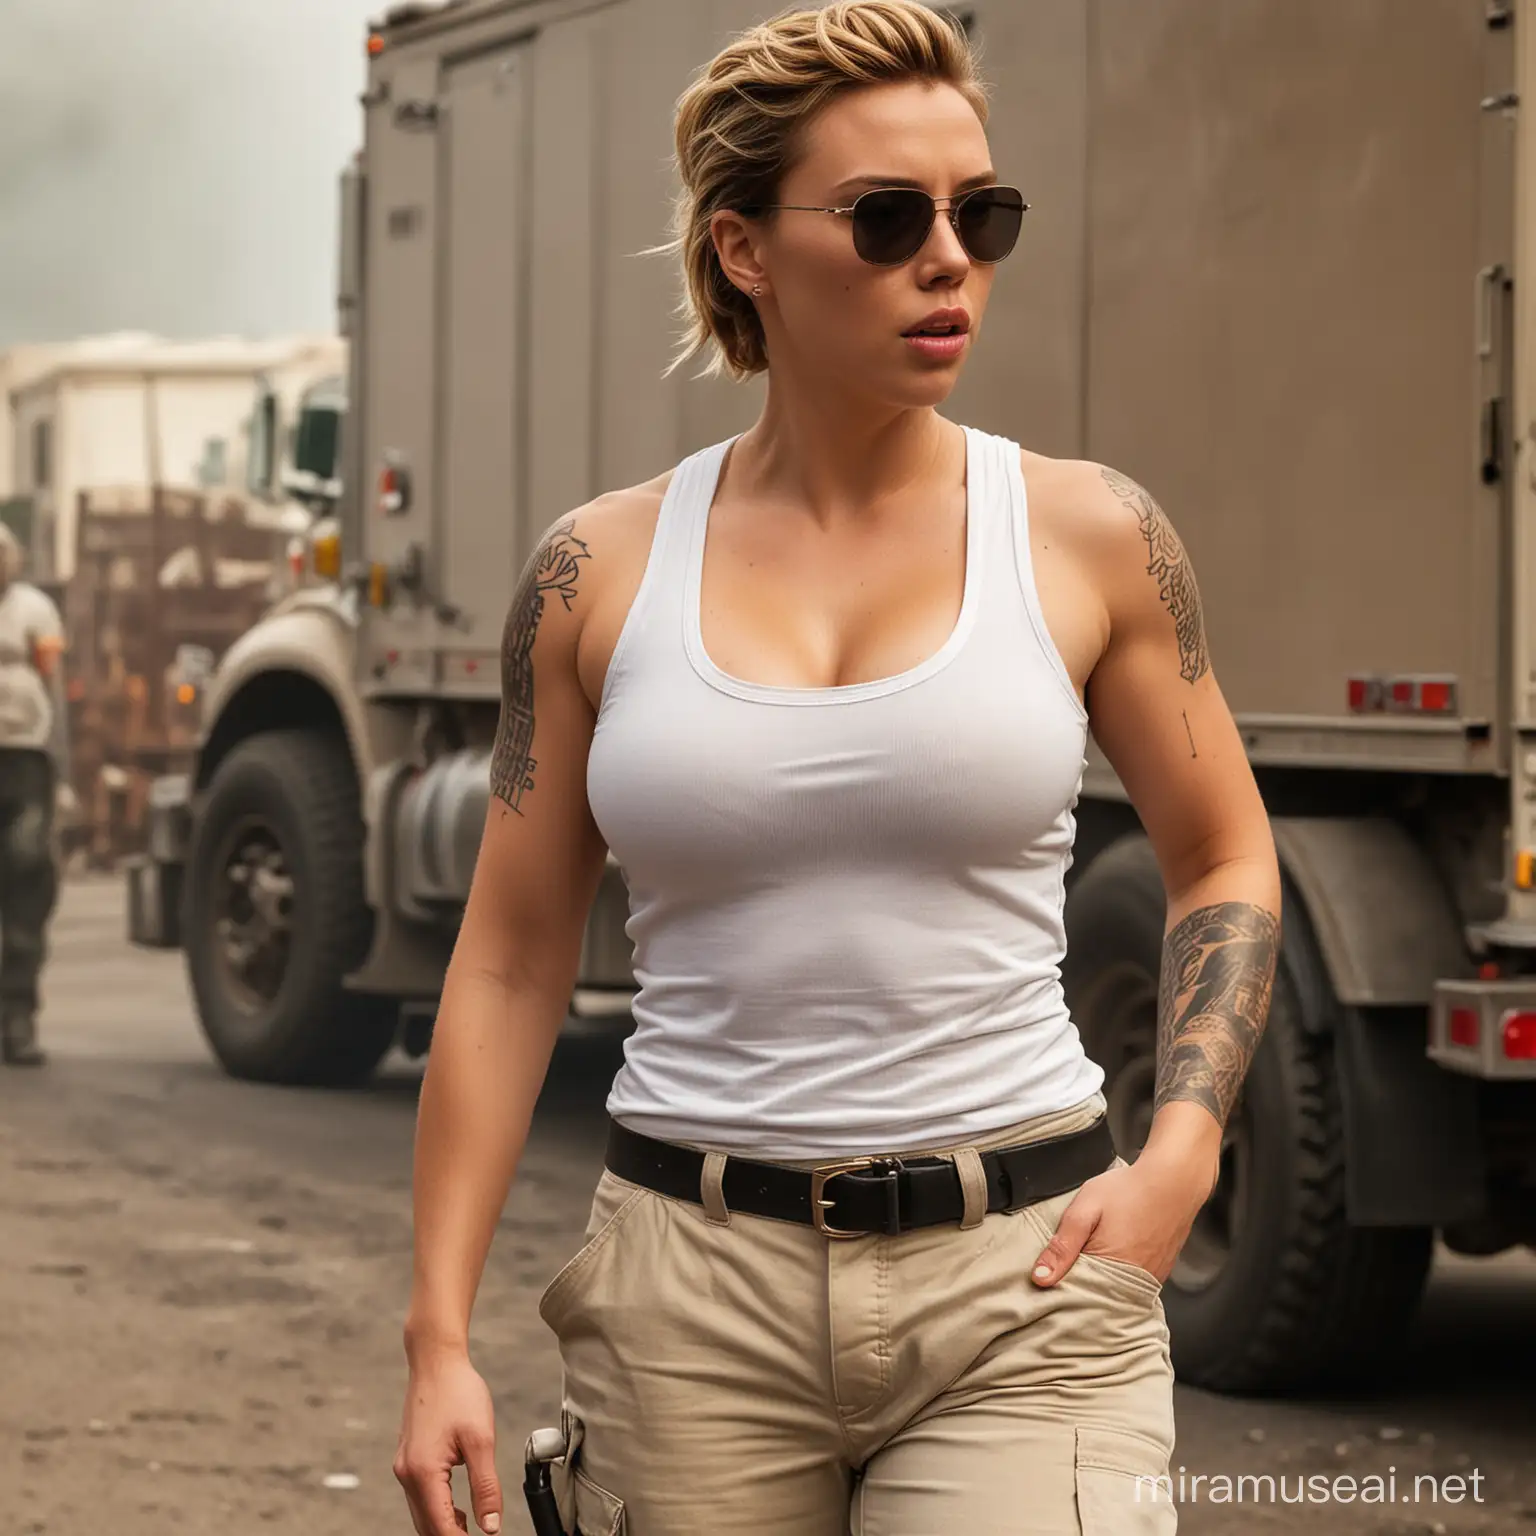 Scarlett Johansson as a firefighter, looking very buff and very muscular, with broad shoulders, looking masculine, with many tattoos, wearing a white tank top, with a big bulge in her pants, wearing sunglasses, looking sweaty, looking tan, full body image